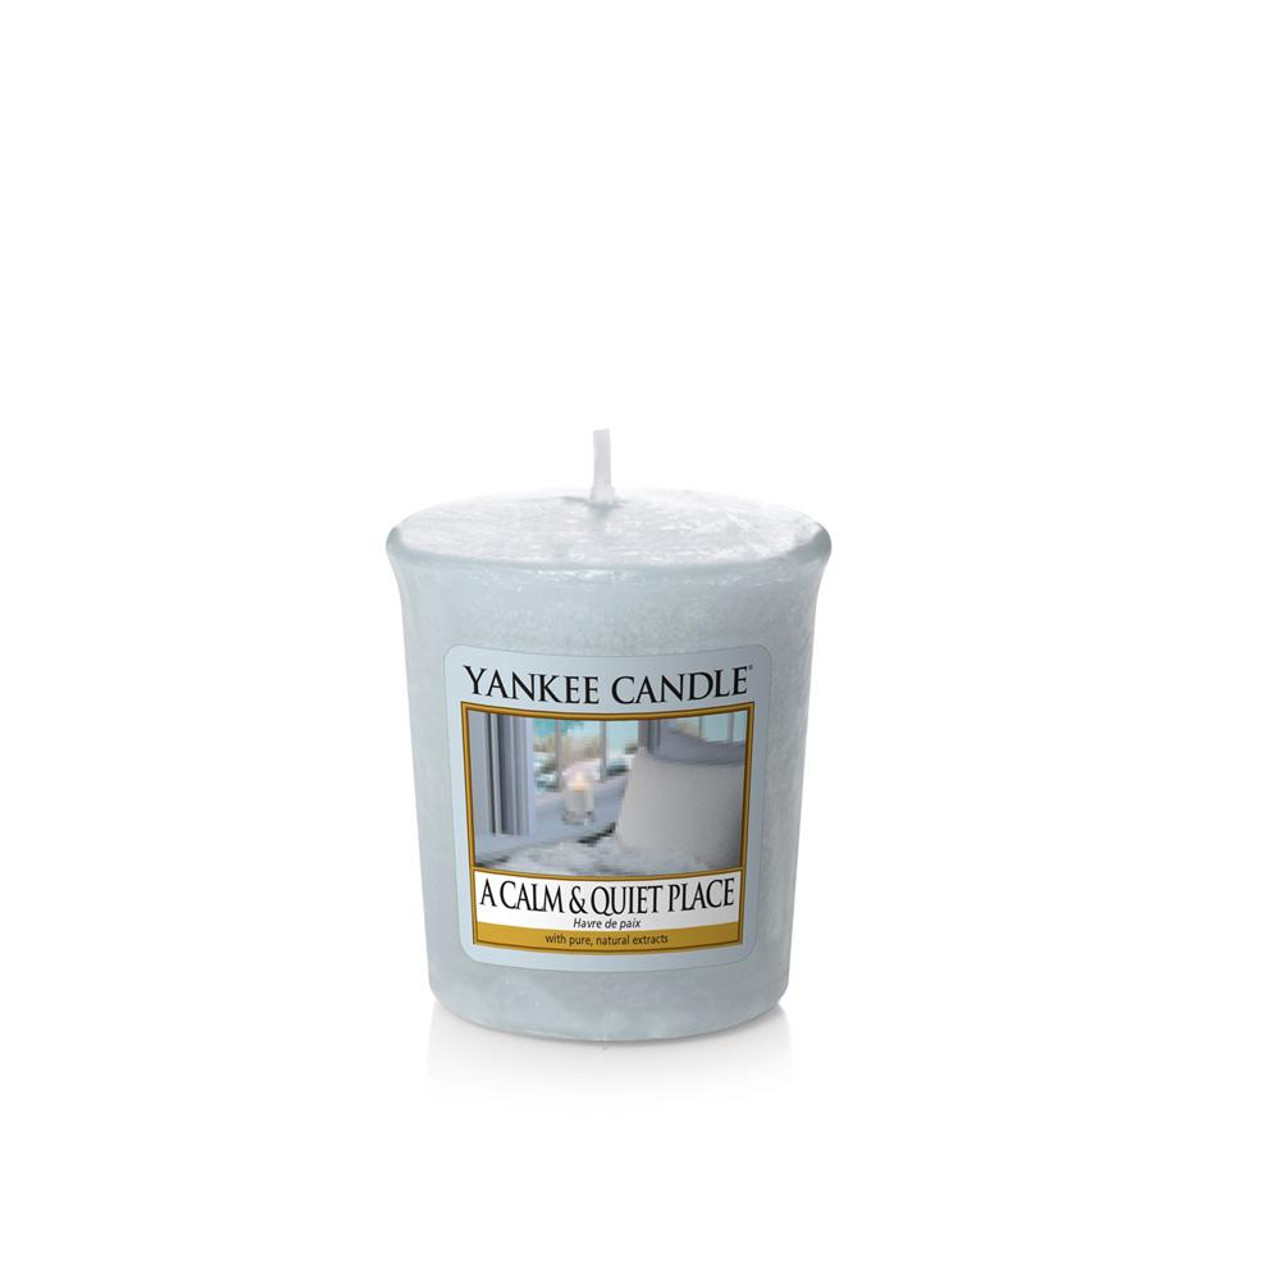 Yankee Candle Wax Melt A Calm & Quiet Place - Aromatic Wax